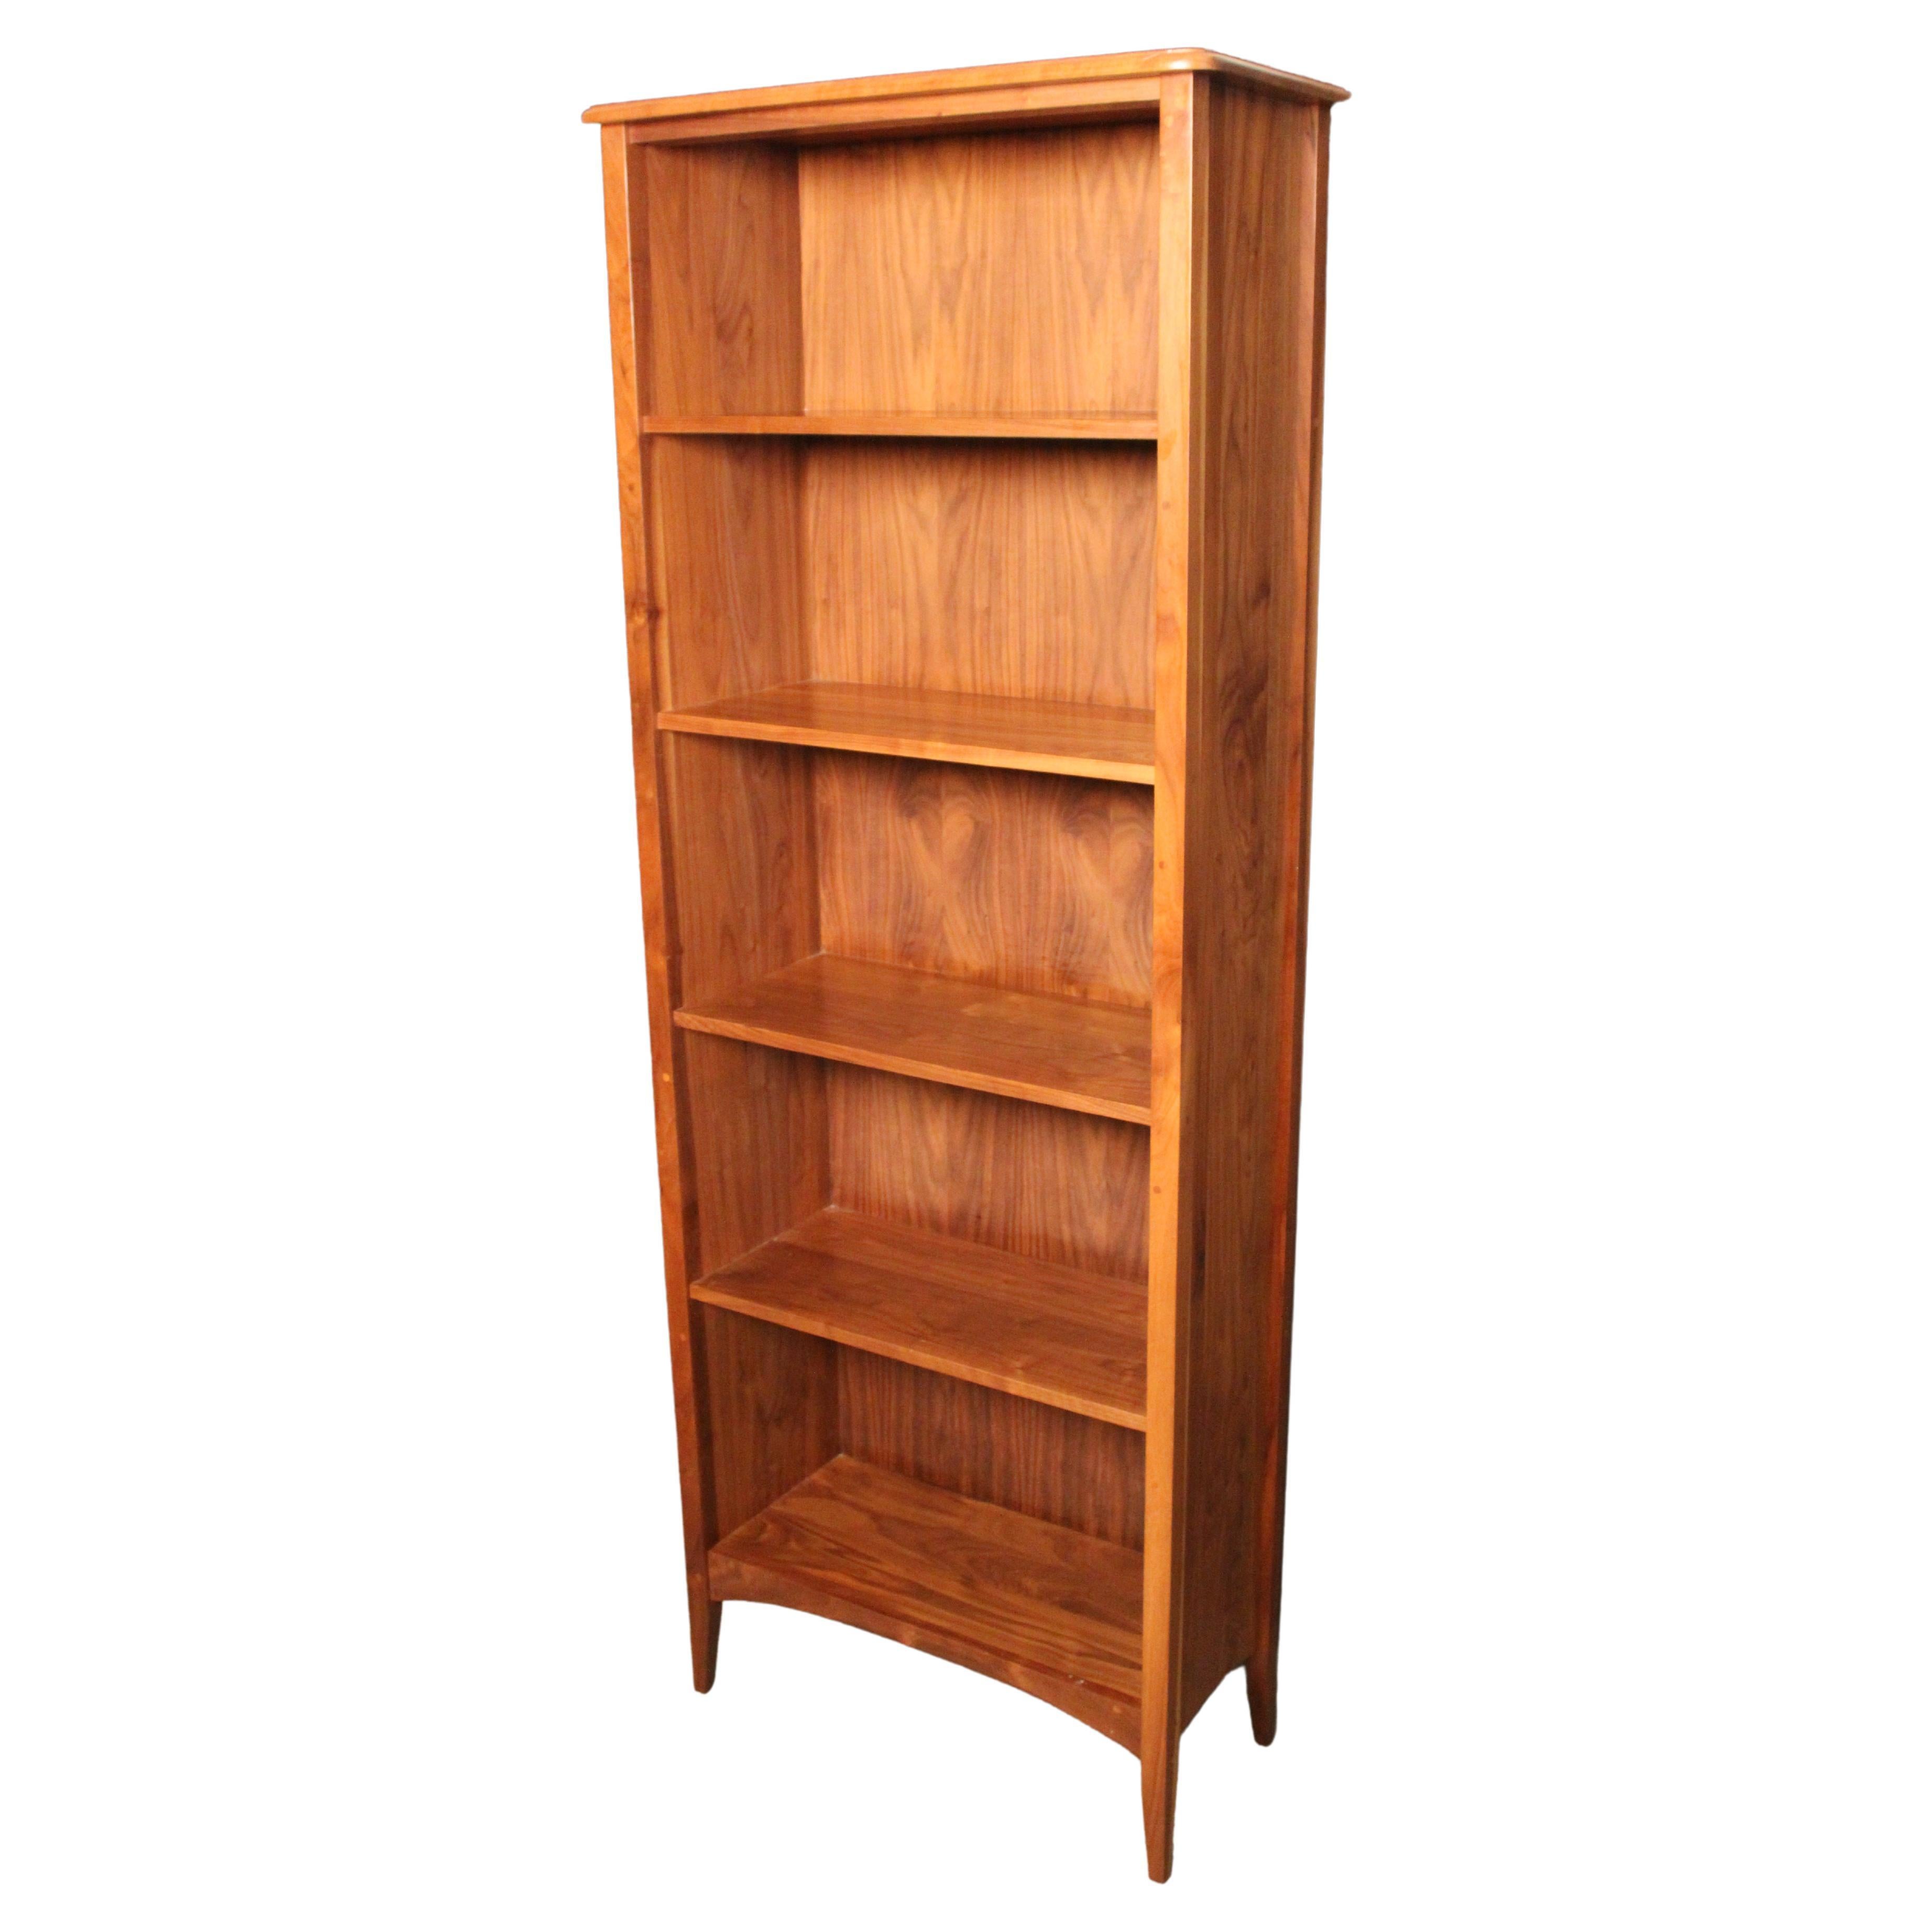 Vintage Cherry "New England" Shaker Bookcase by Pompanoosuc Mills